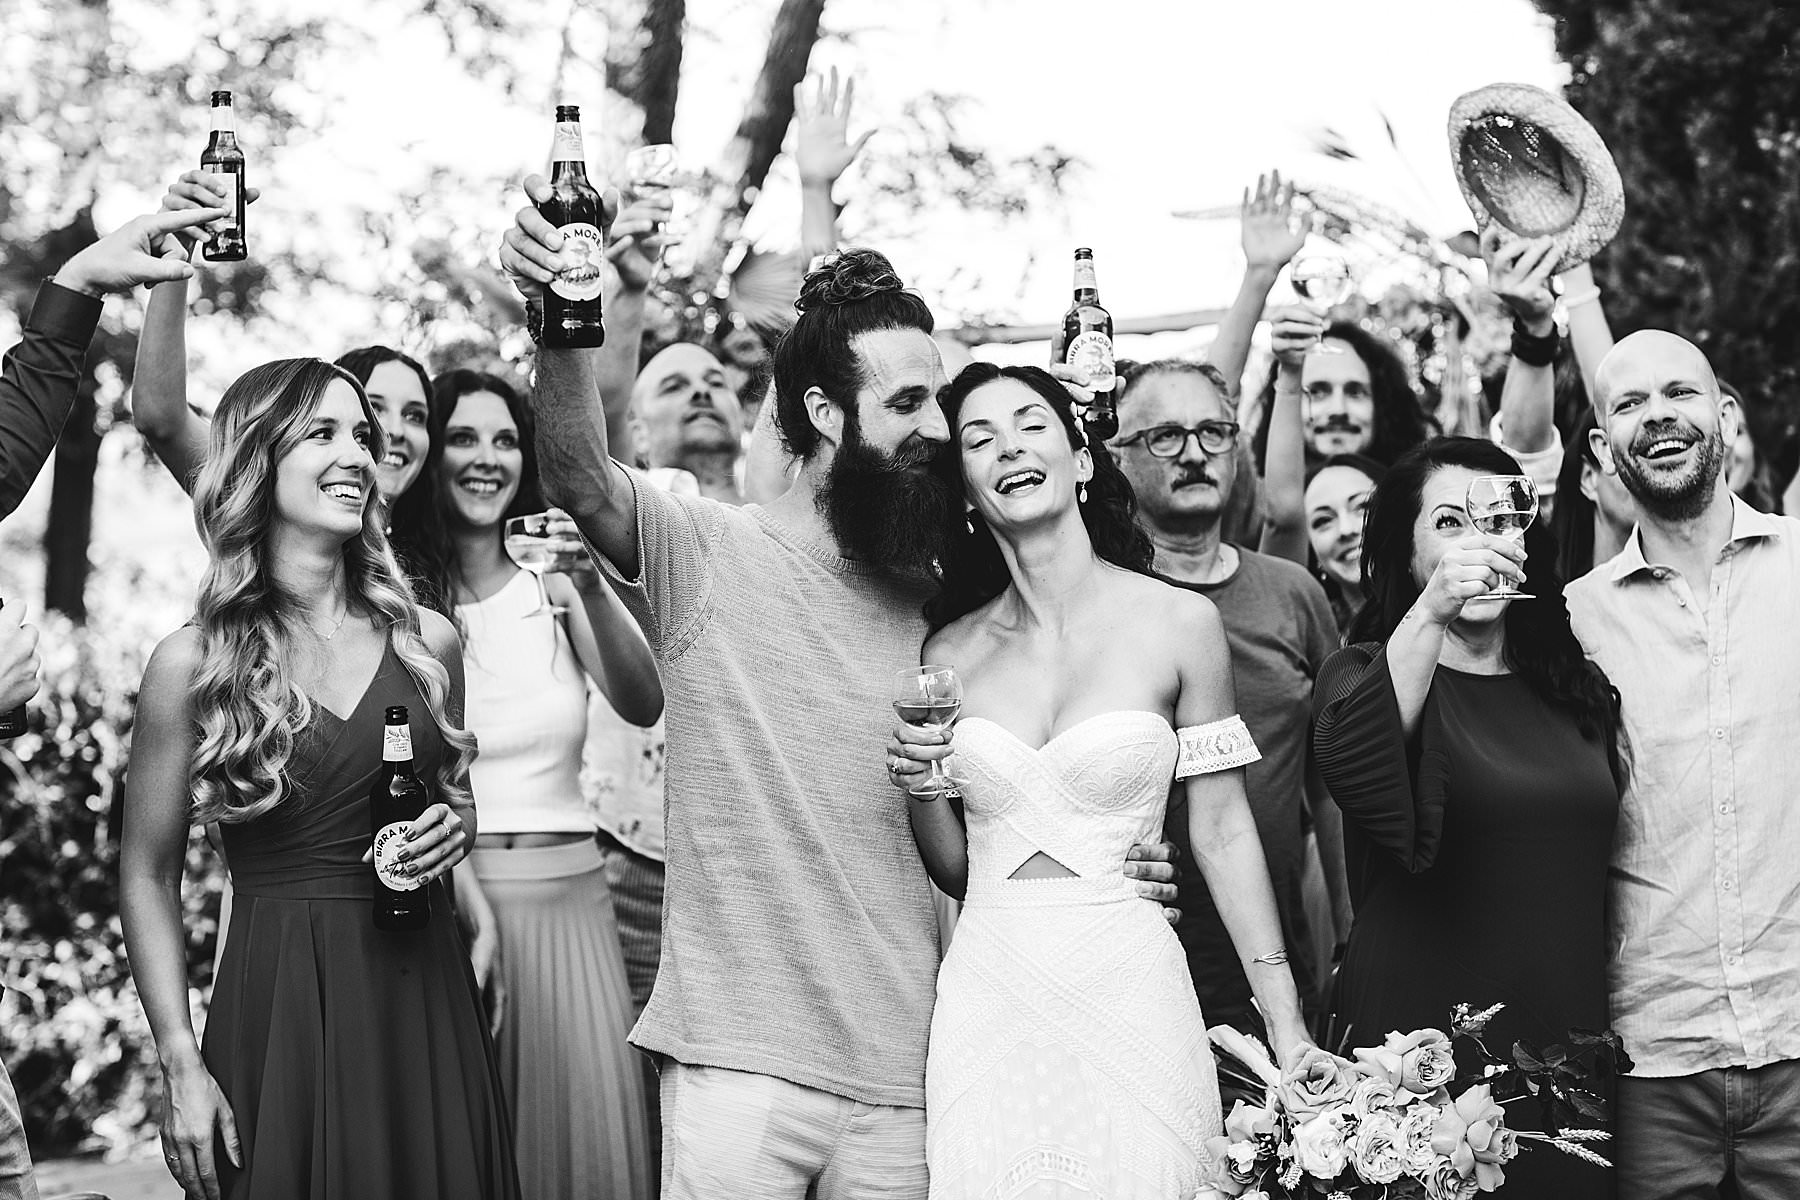 Unconventional and full of energy boho chic destination wedding in Tuscany at La Valle farmhouse near Montaione